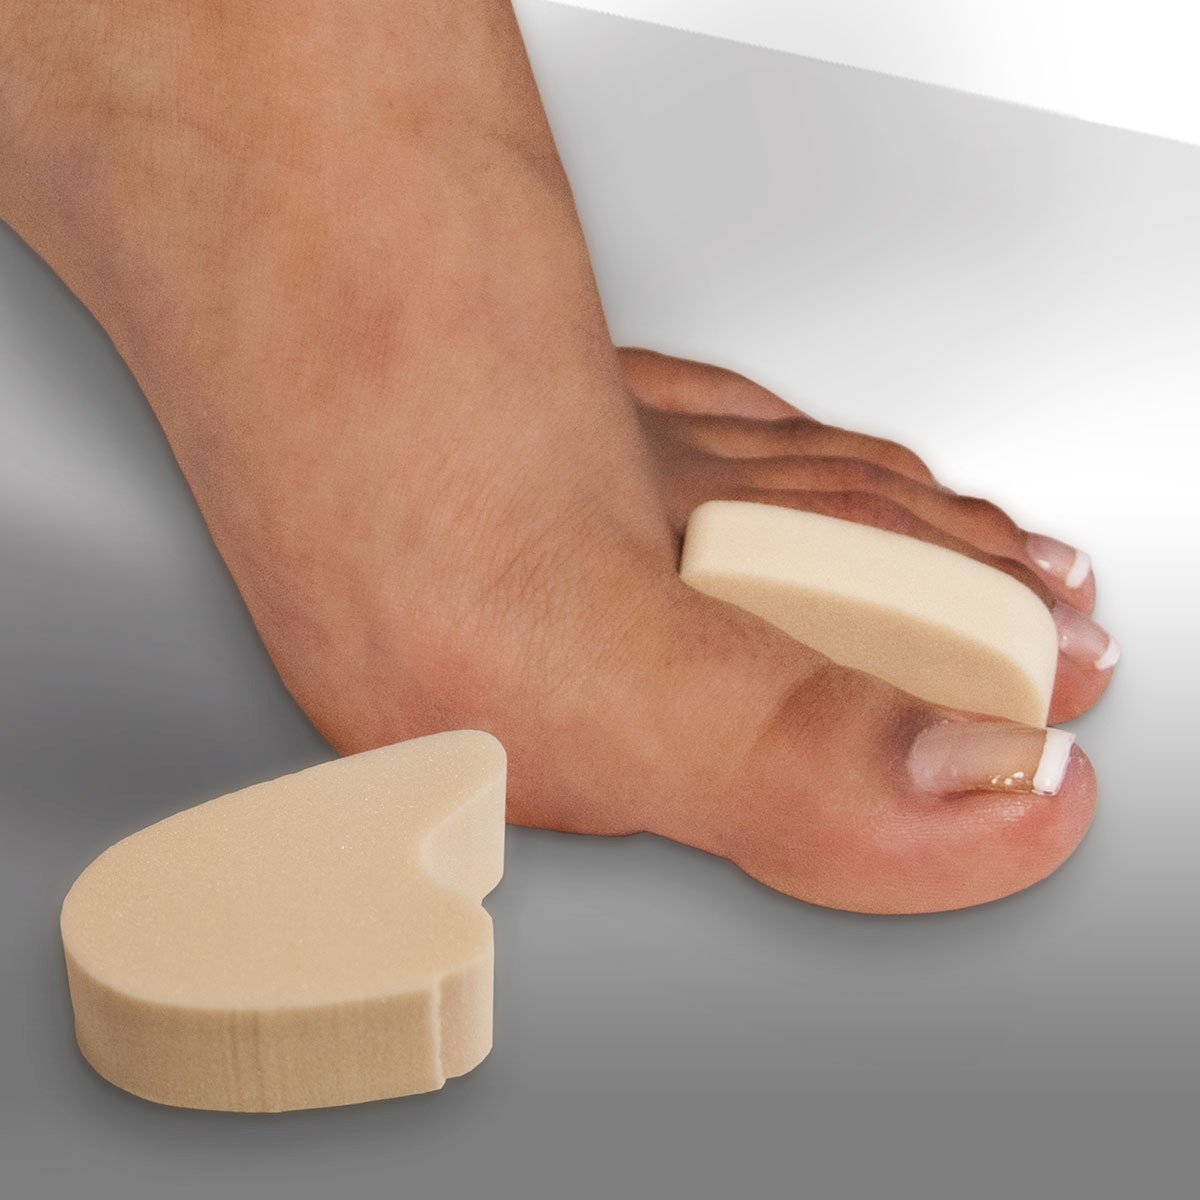 Large, firm toe separator used following bunion surgery